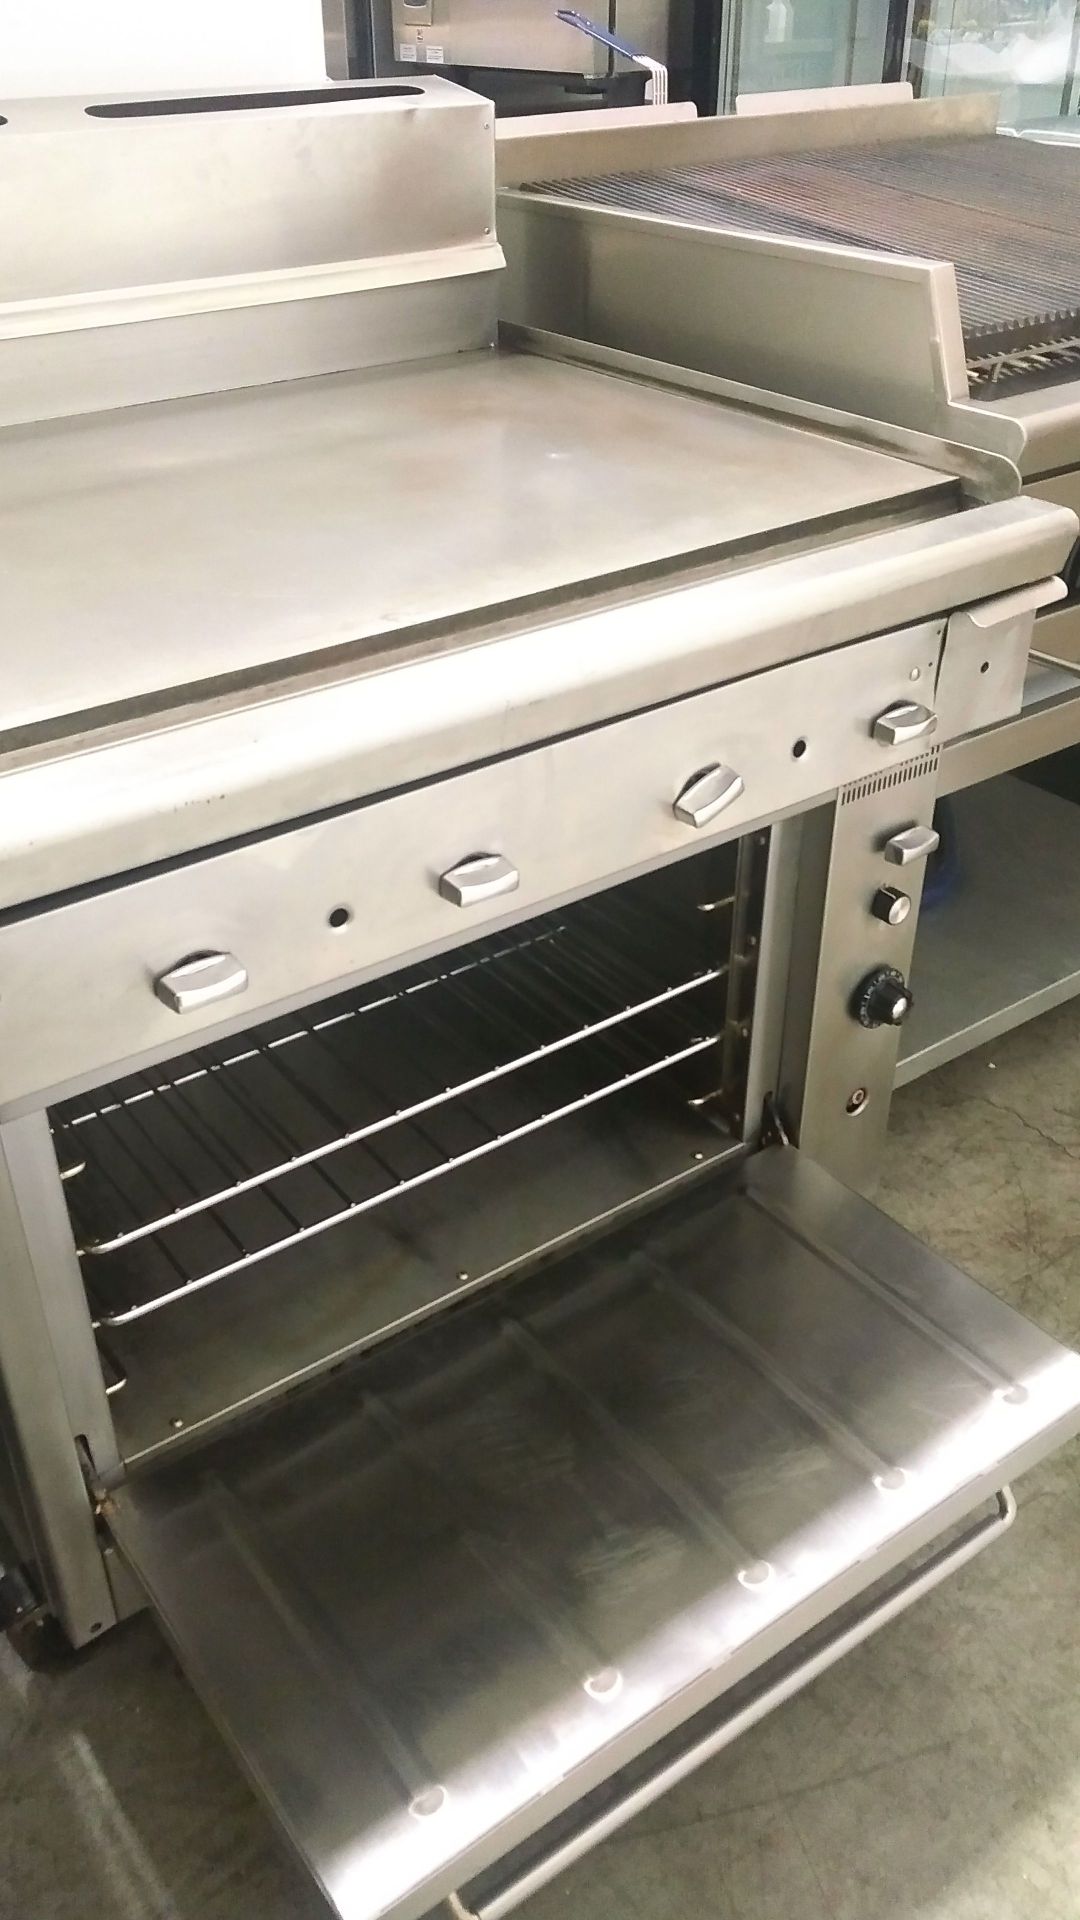 Quest 36" NG Griddle Convection Range - Image 4 of 4